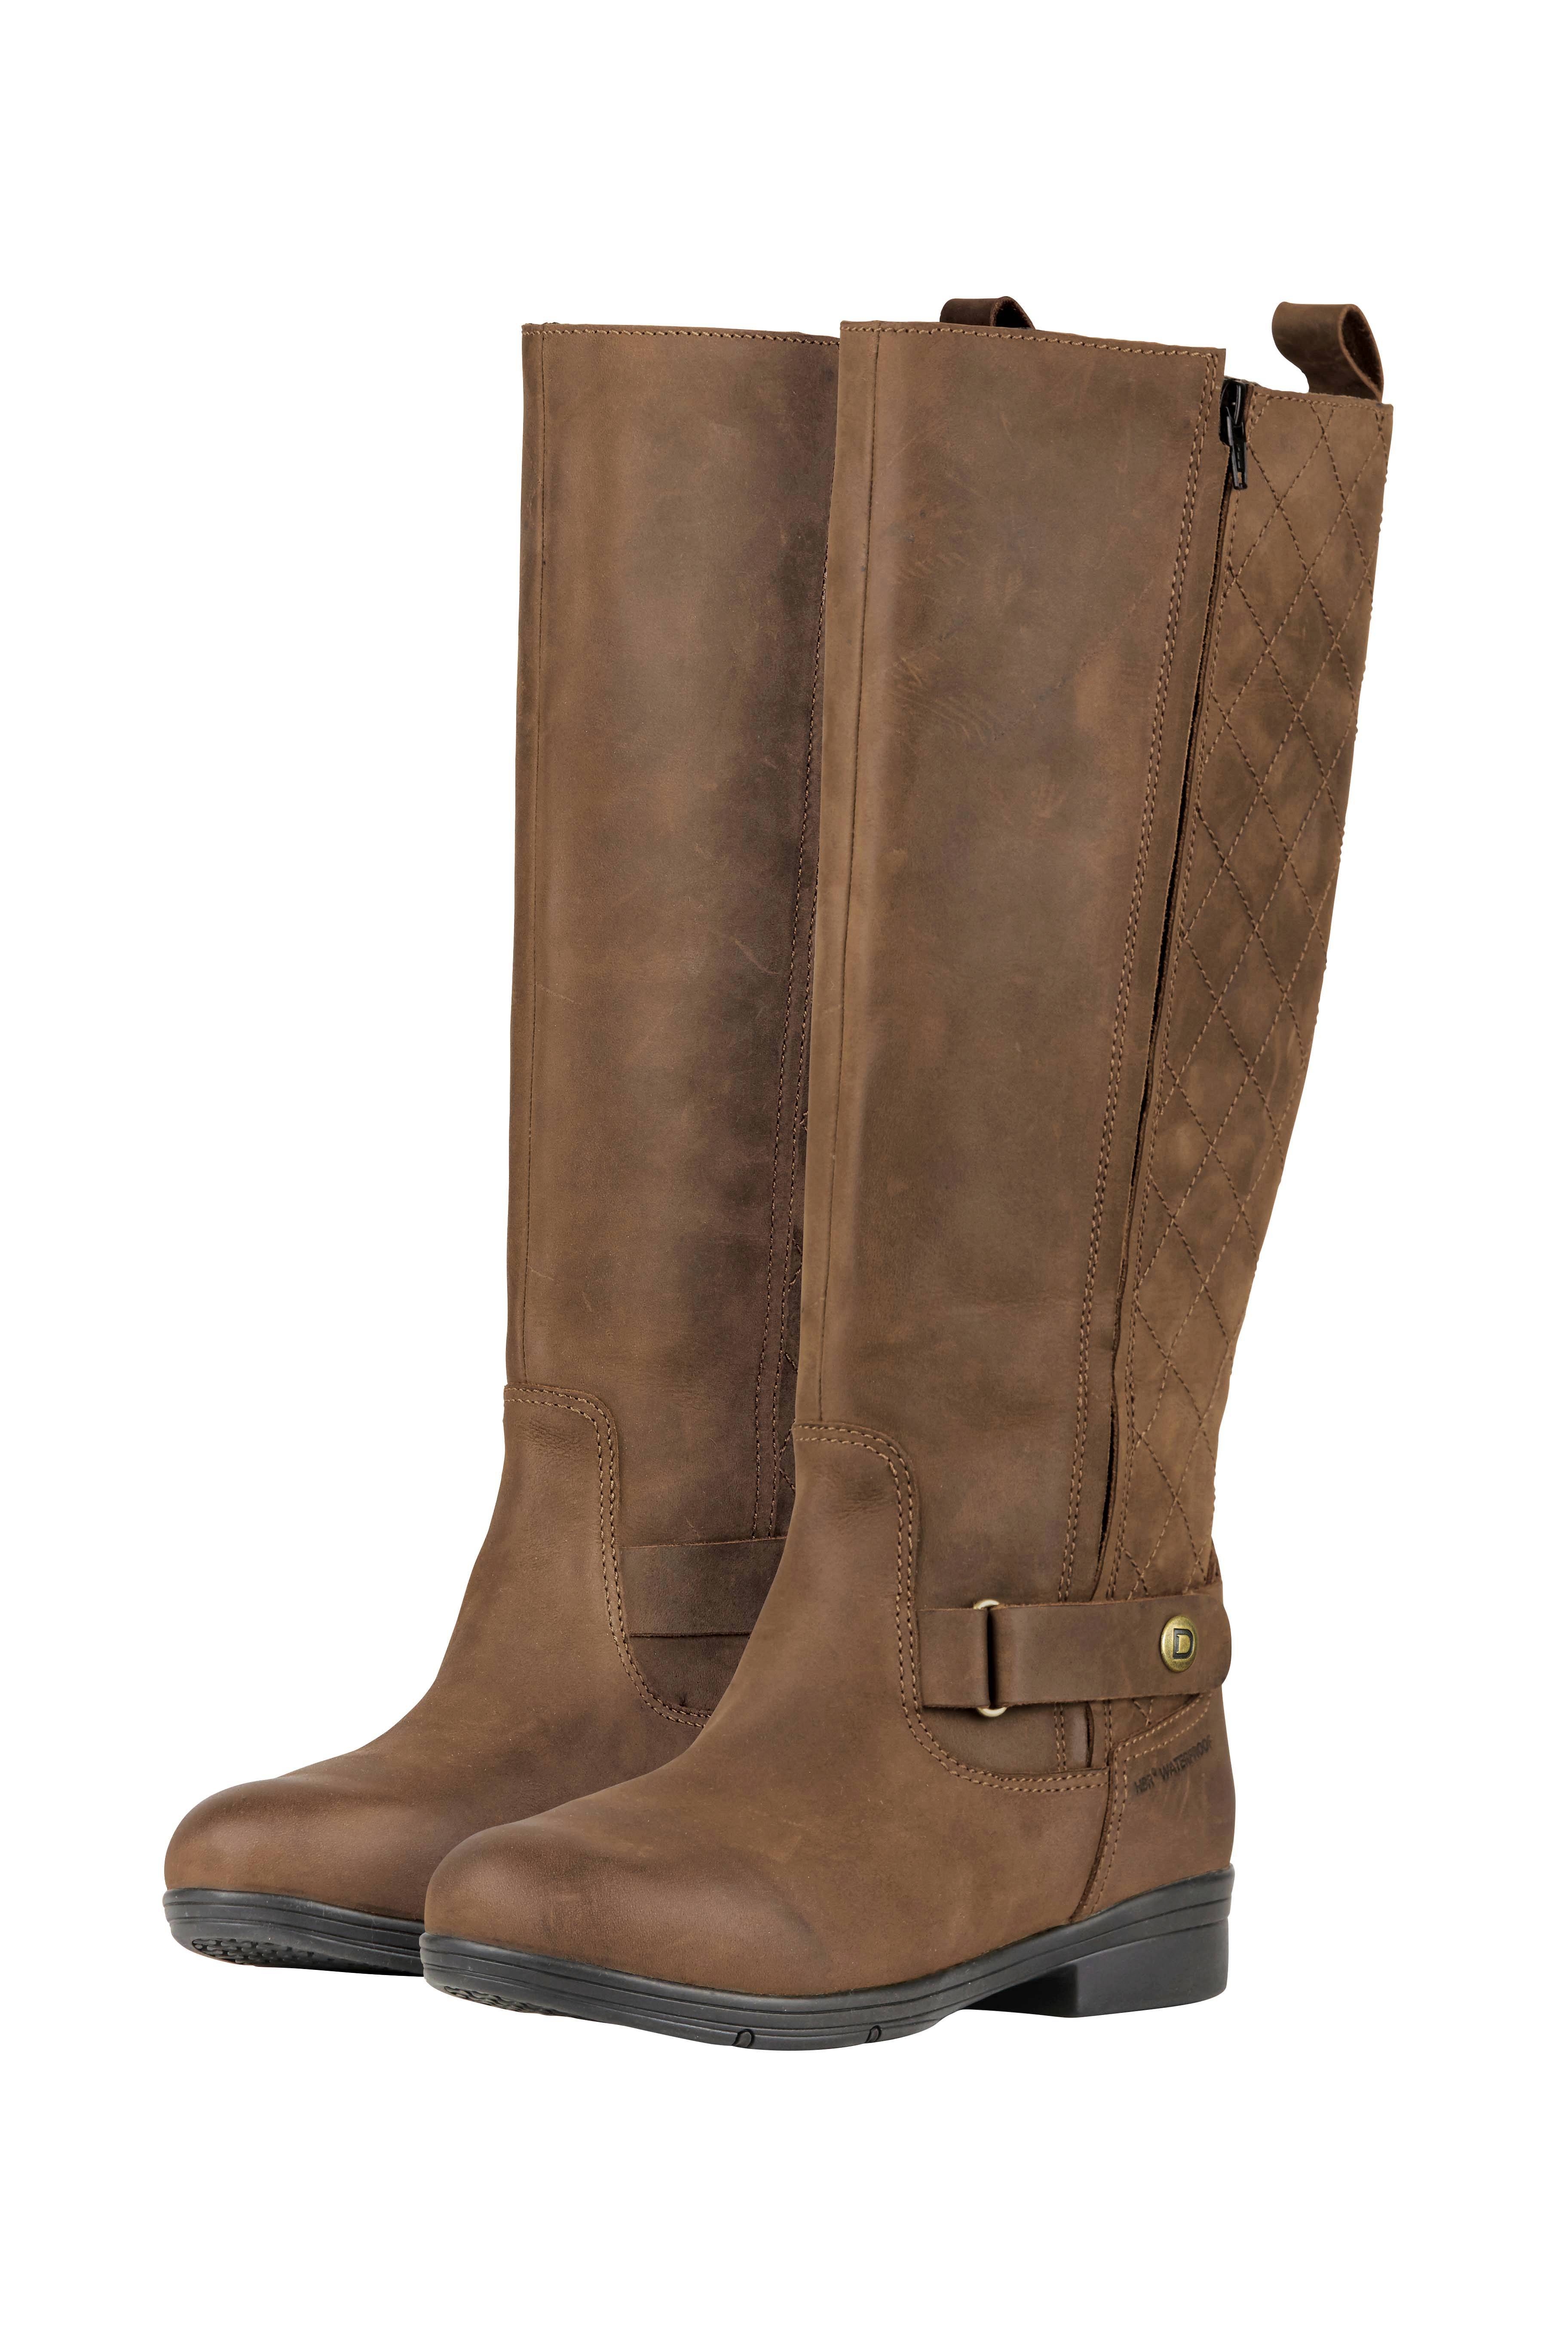 Dublin Cherwell Tall Boots Ladies Country Ventilated Water Repellent Zip Low 